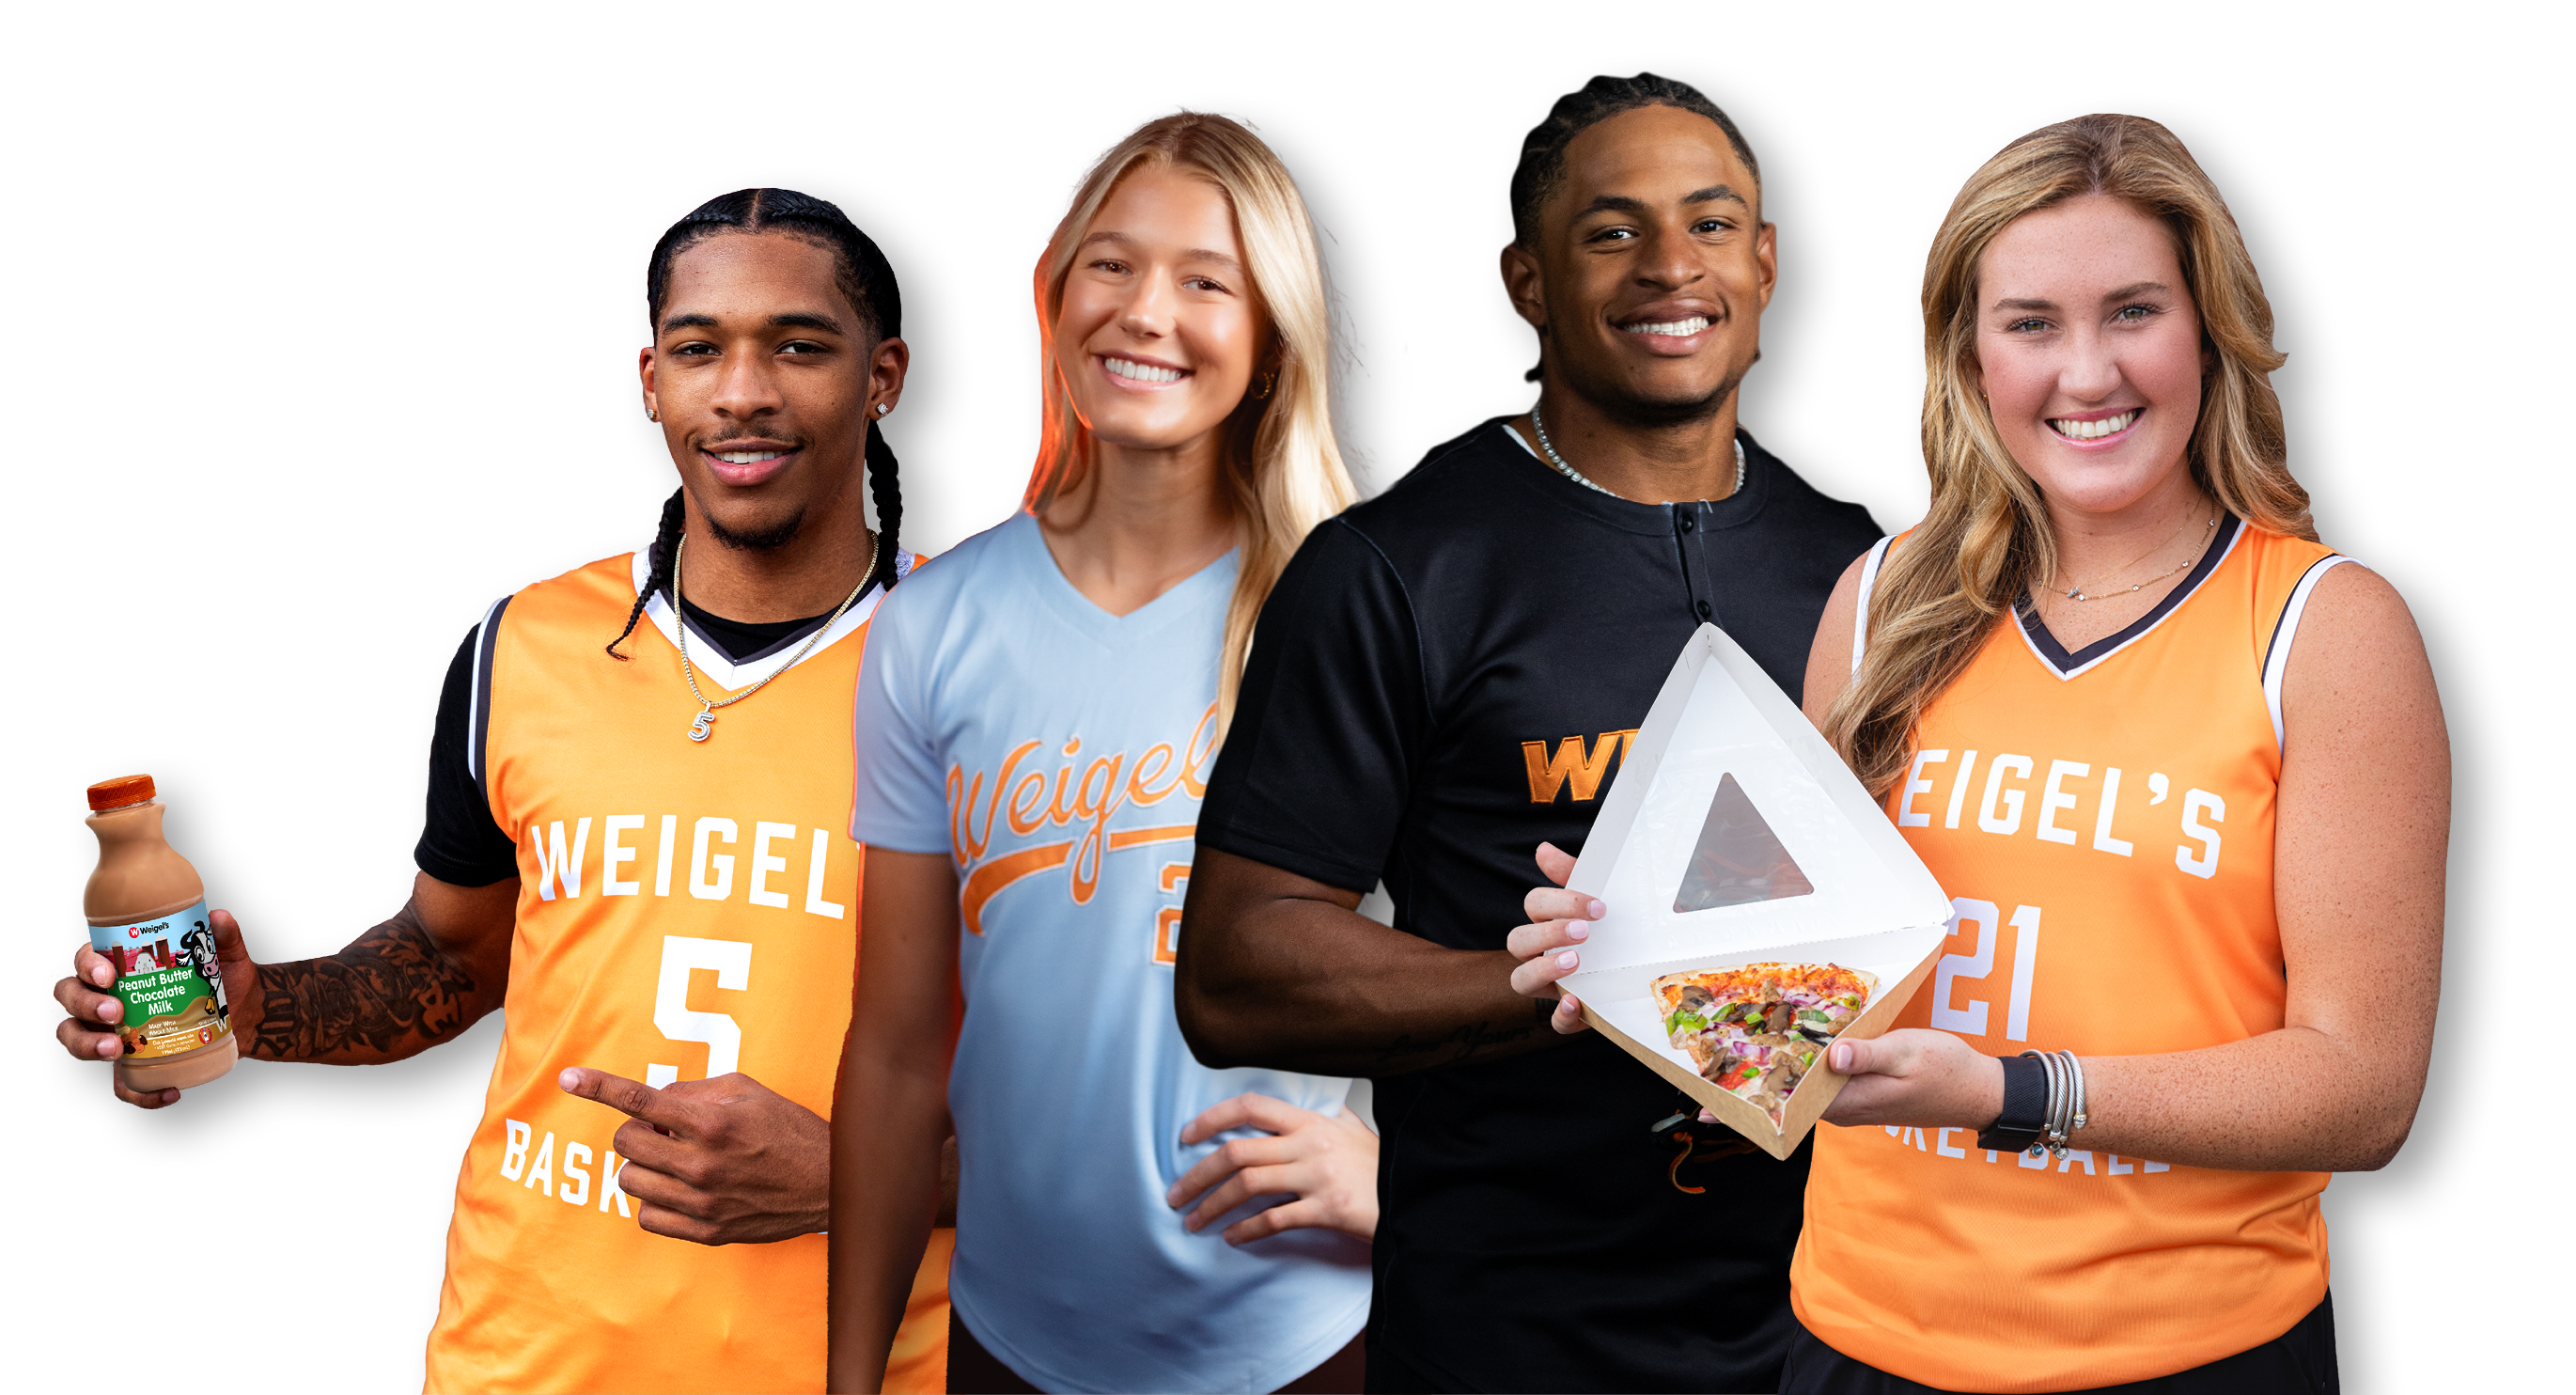 From left to right in the picture of Weigel's NIL athletes are Zakai Zeigler, Karlyn Pickens, Christian Moore, and Tess Darby